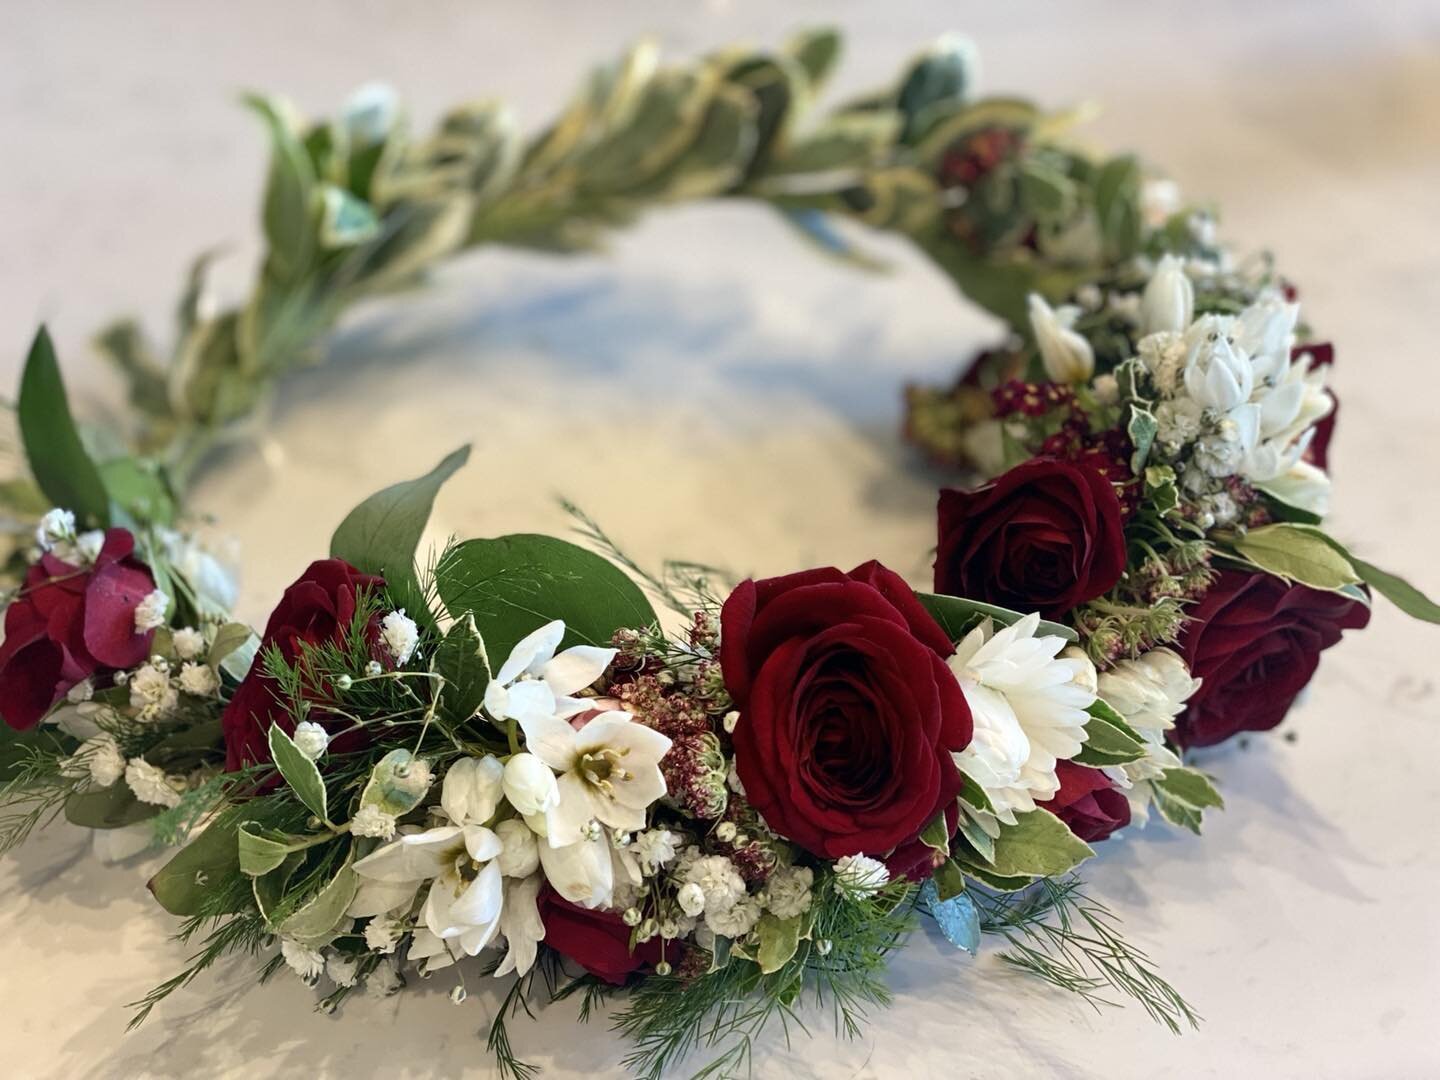 Not all crowns need jewels 💎  custom made floral crowns for your special occasions #headwreath#florist